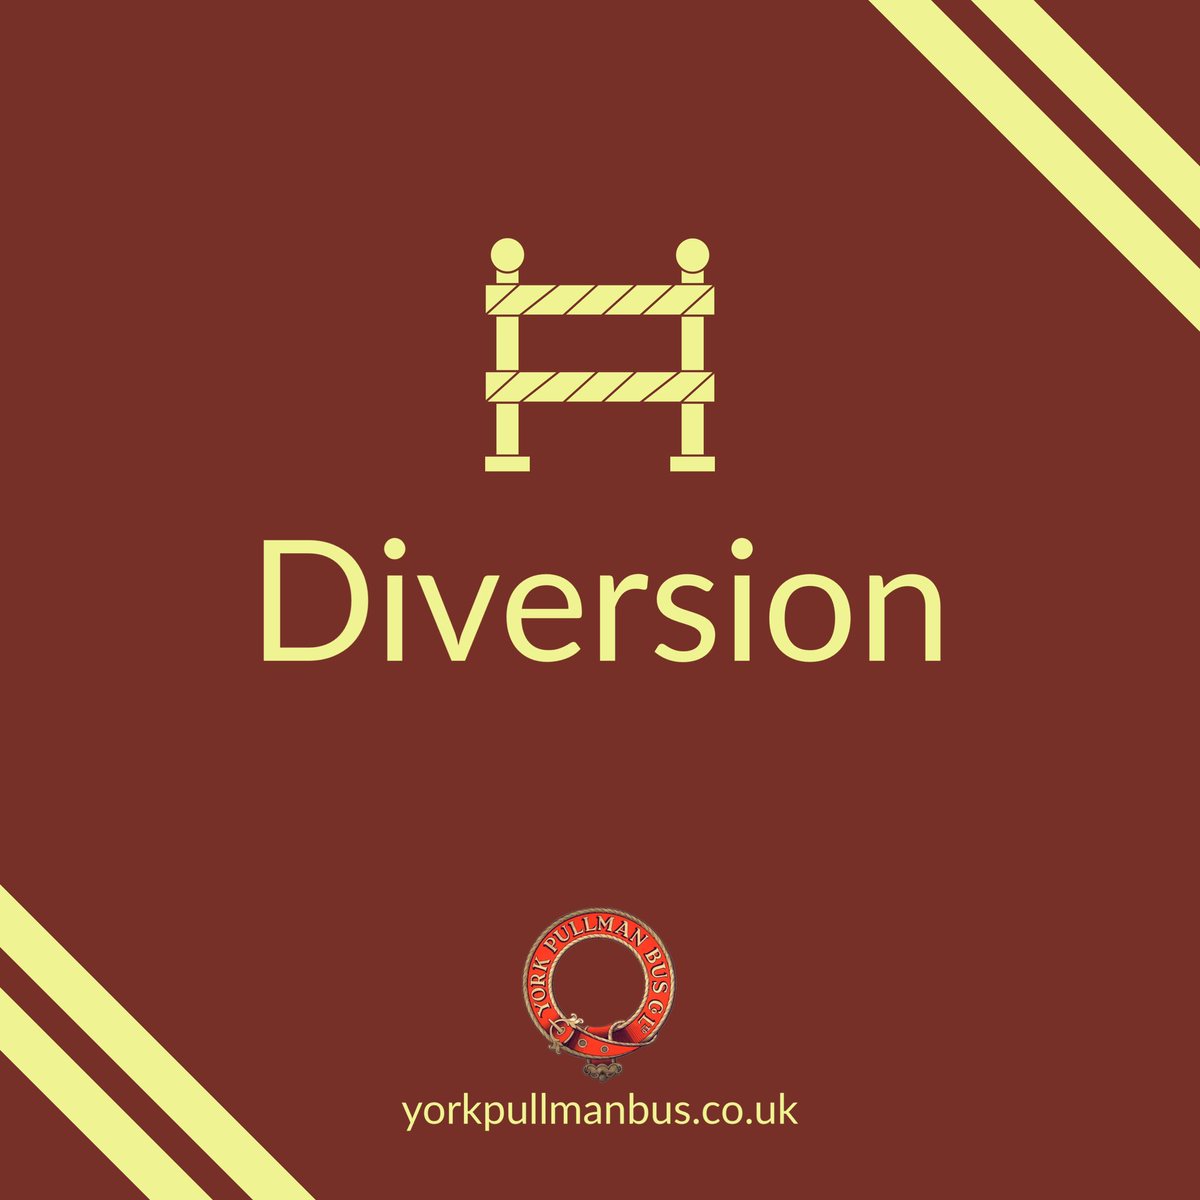 ⛔ Queen Street (York Rail Station) is closed until 6am Mon 22nd April. ⚠️ Disruption to My21, My36 & My37. A free shuttle service (YSS) will operate between Blossom St, Nunnery Ln, Tower St, Clifford St, Rougier St and York Rail Station. See here👇 yorkpullmanbus.co.uk/news/service-u…